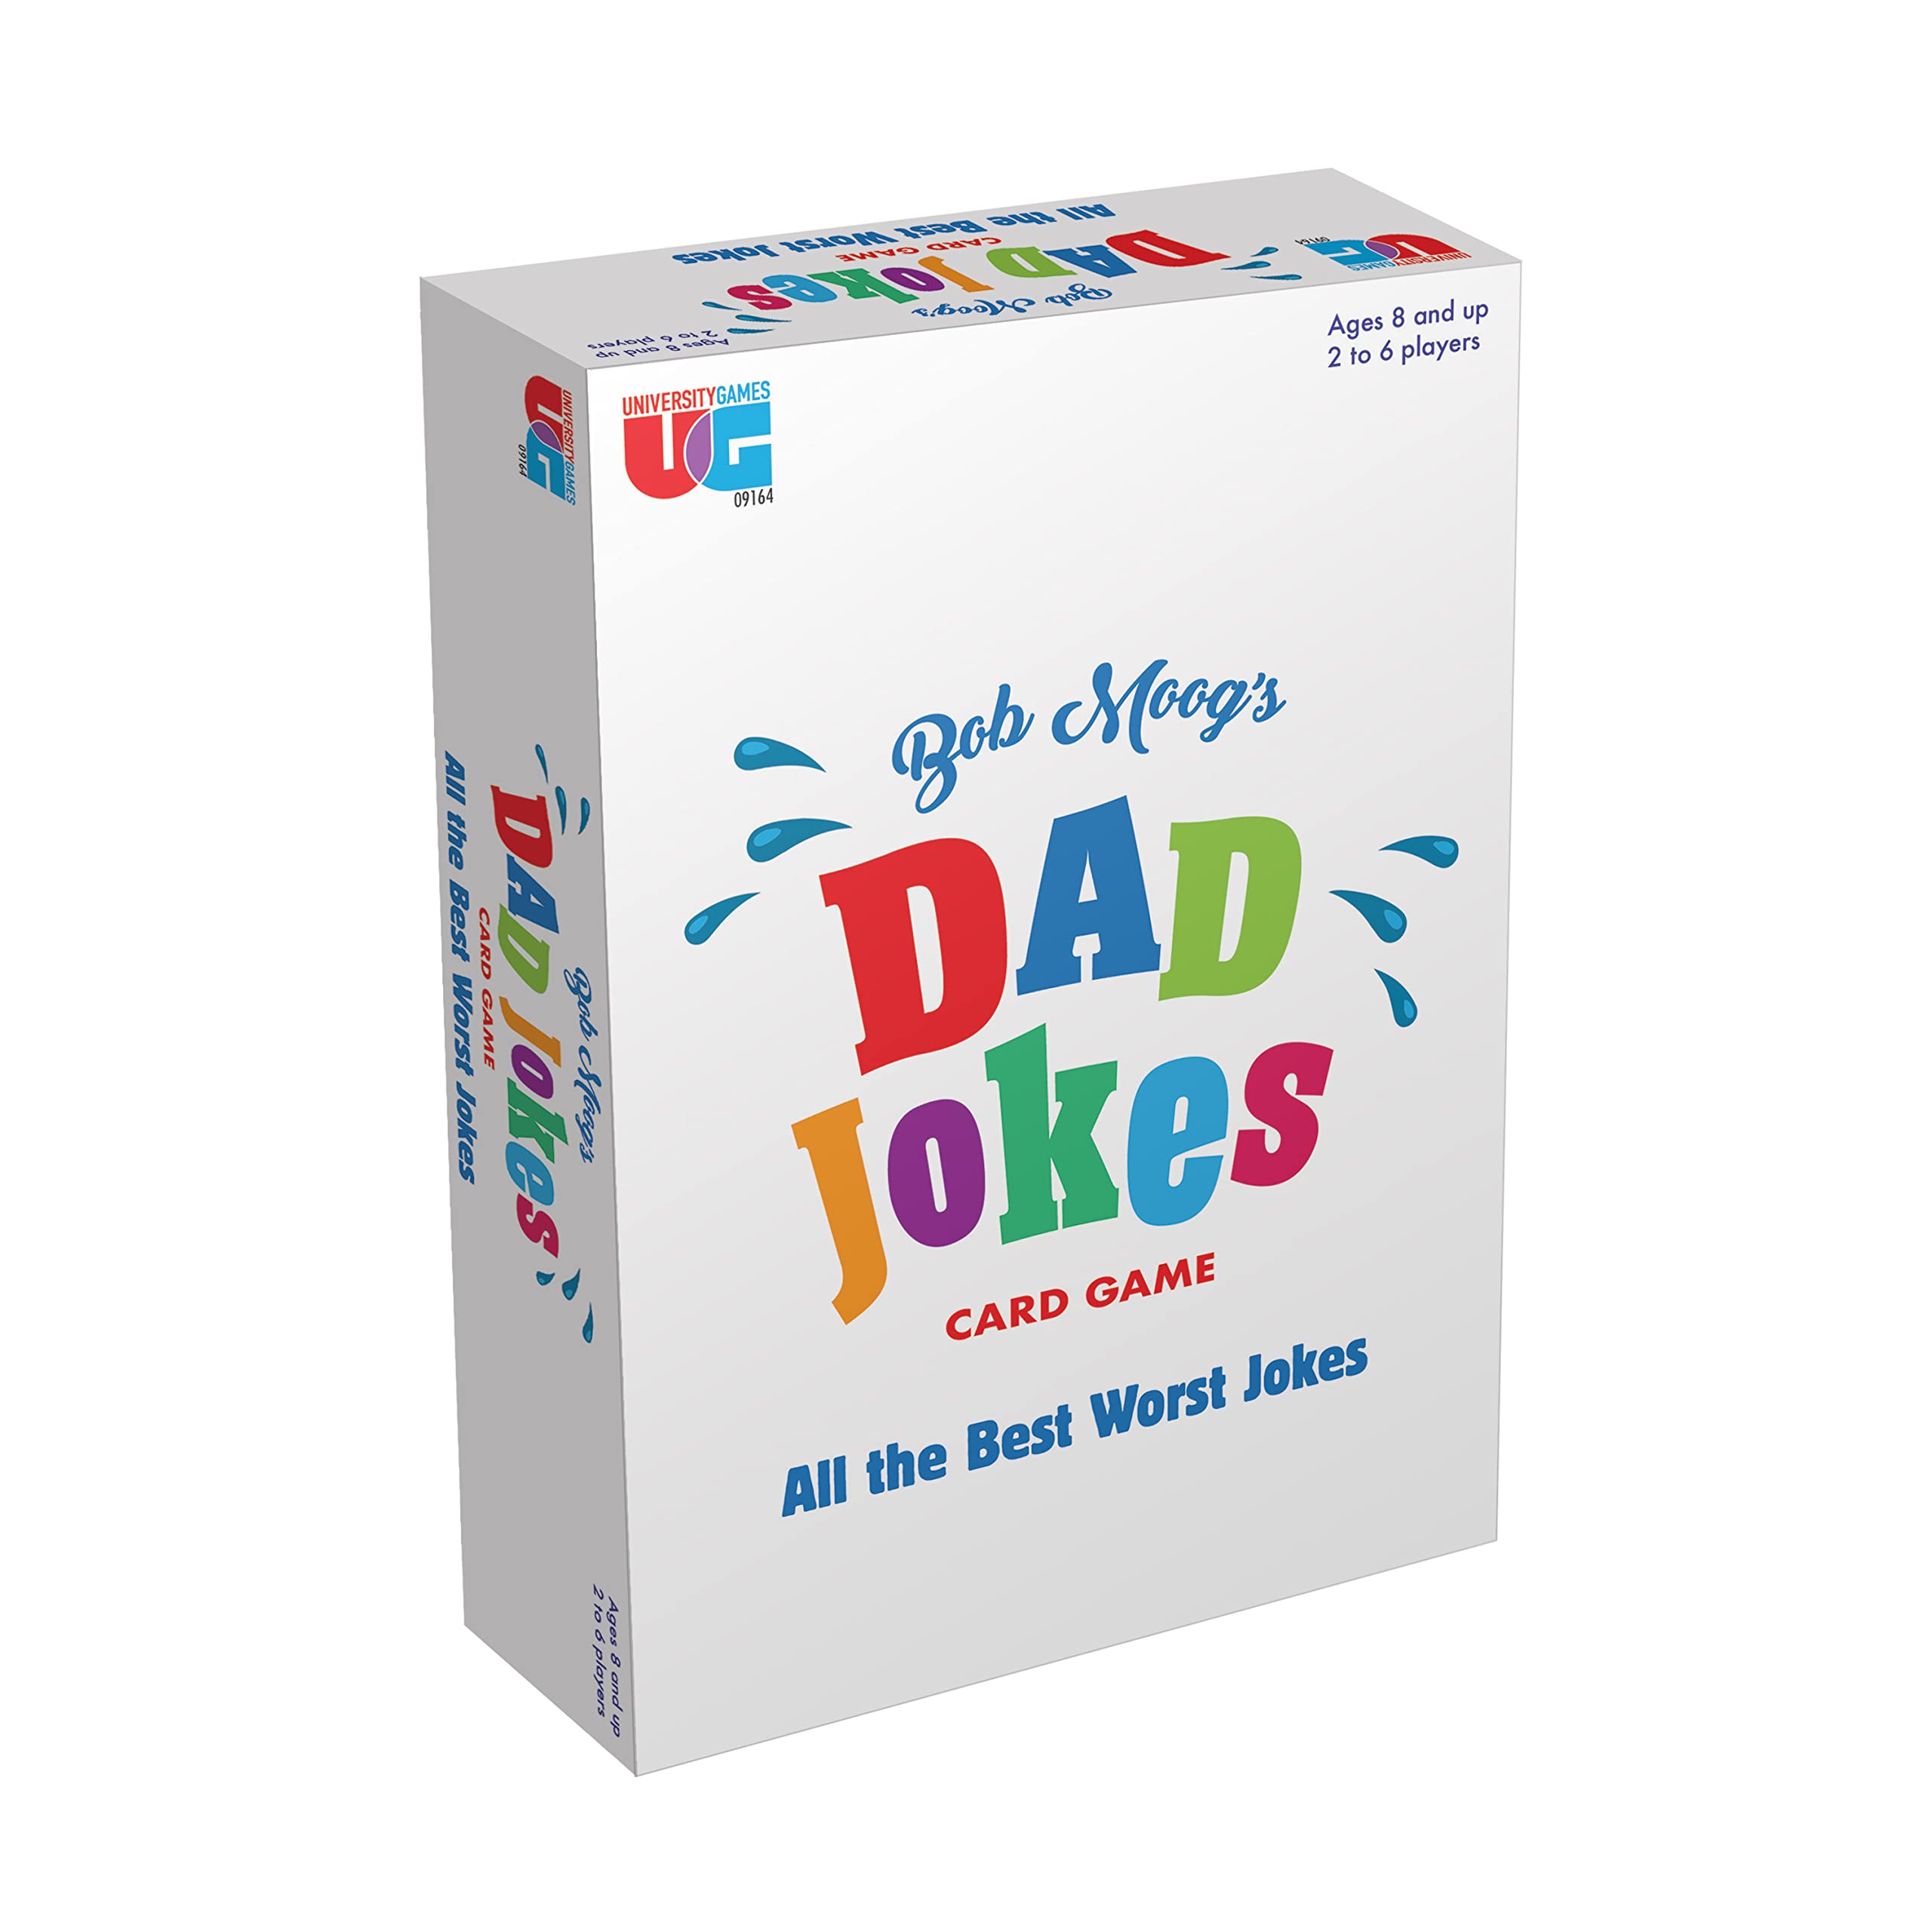 University Games, Bob Moog's Dad Jokes Matching Card Game, Perfect for Game Night, for Ages 8 and Up, 2-6 Players